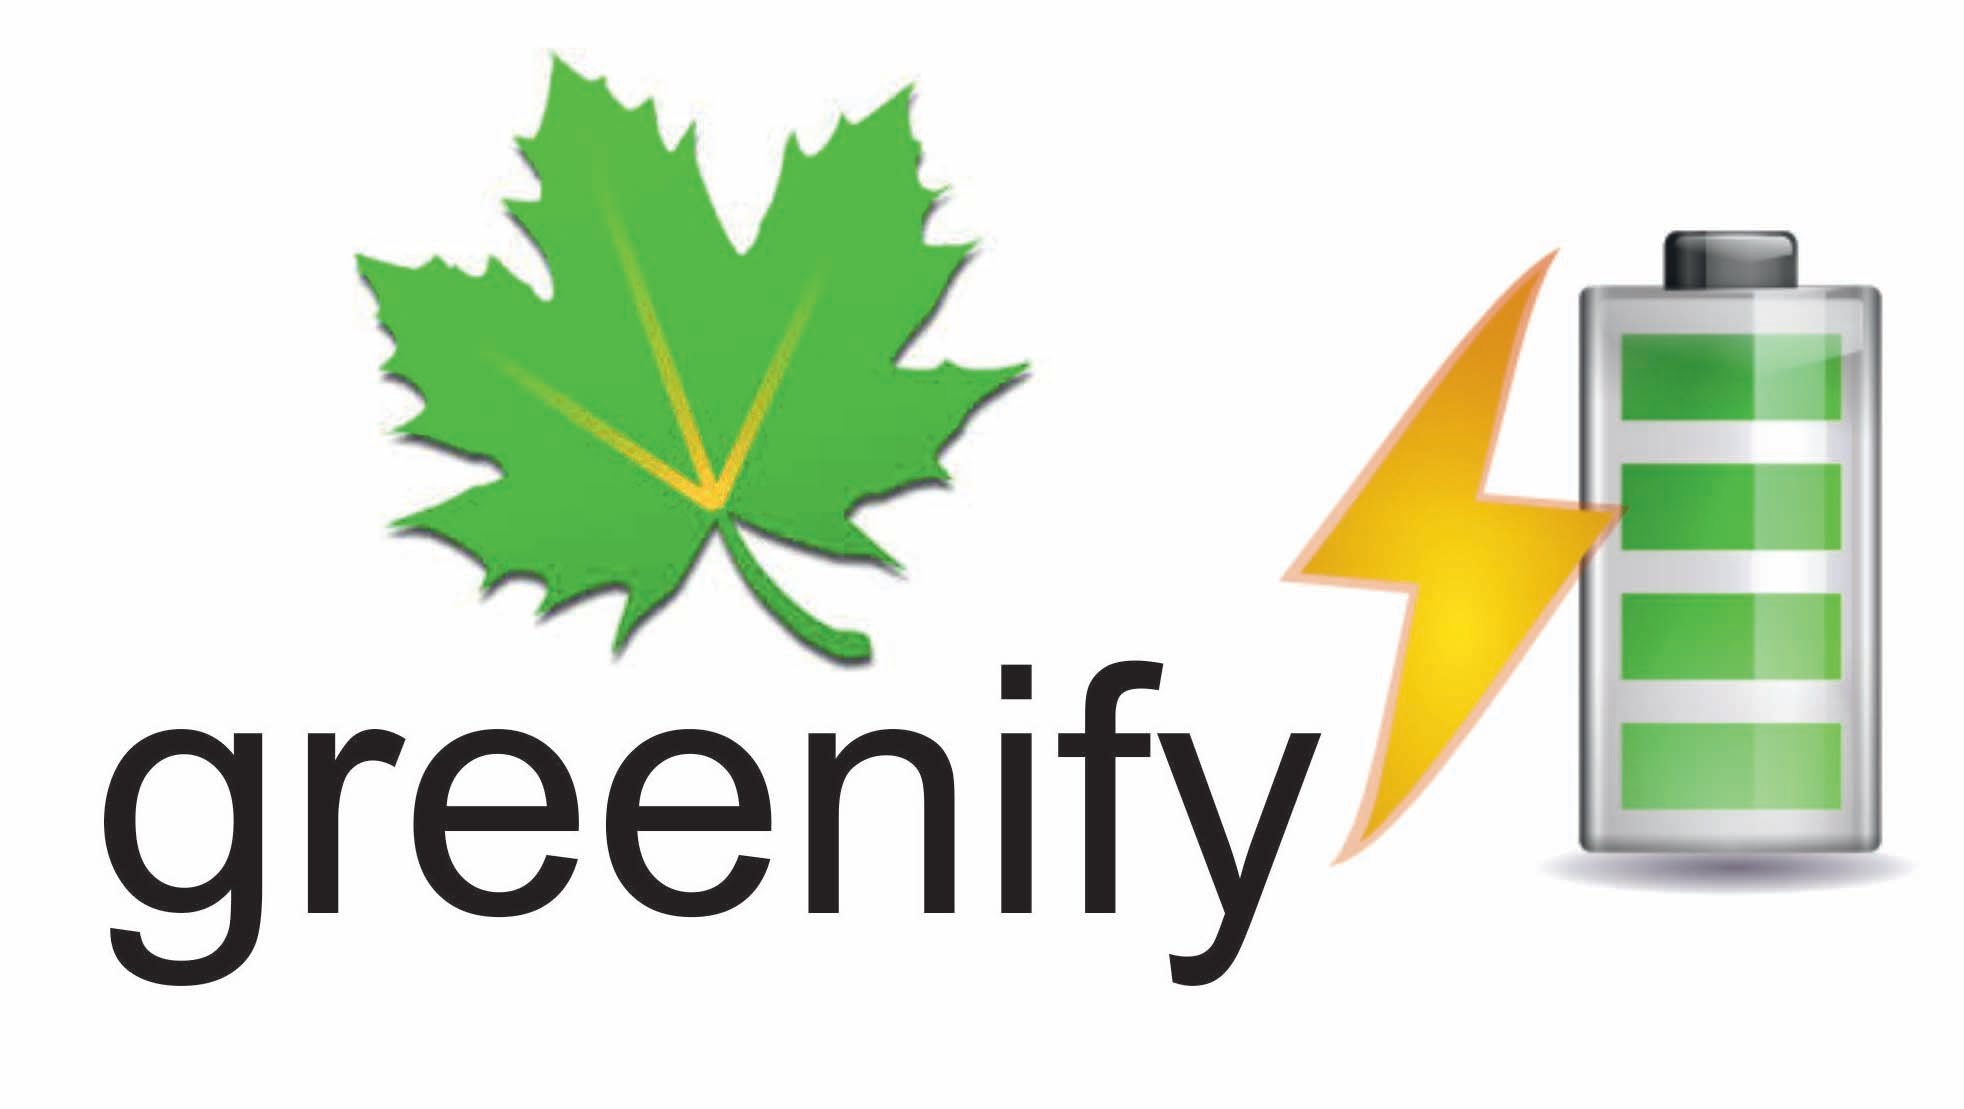 Greenify 2.9 Beta 3 added more features including Aggressive Doze for Android 6.0 1